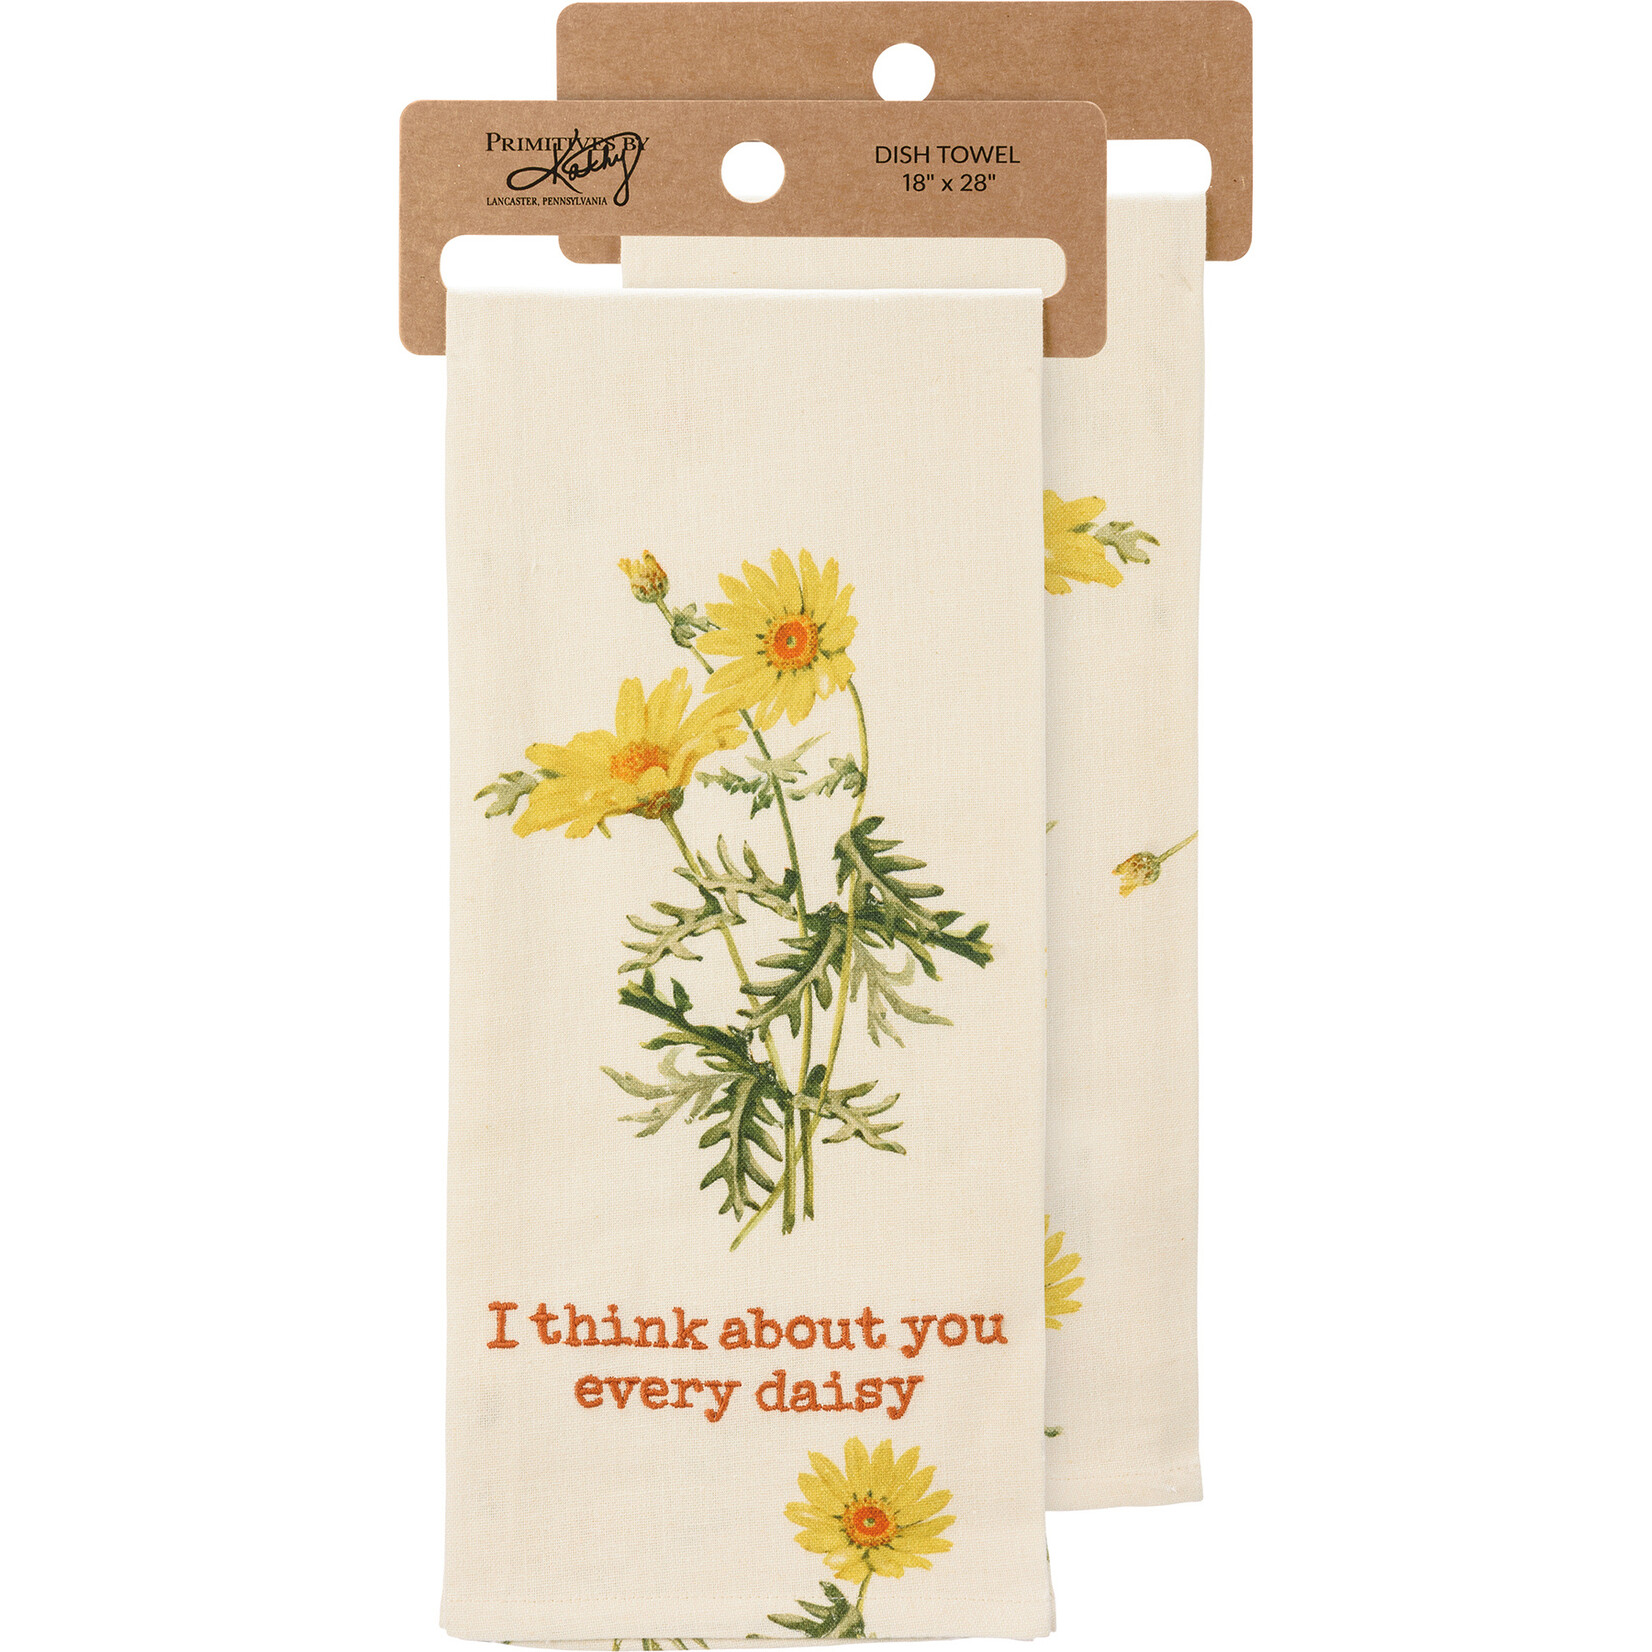 Primitives by Kathy Primitives by Kathy Every Daisy Kitchen Towel